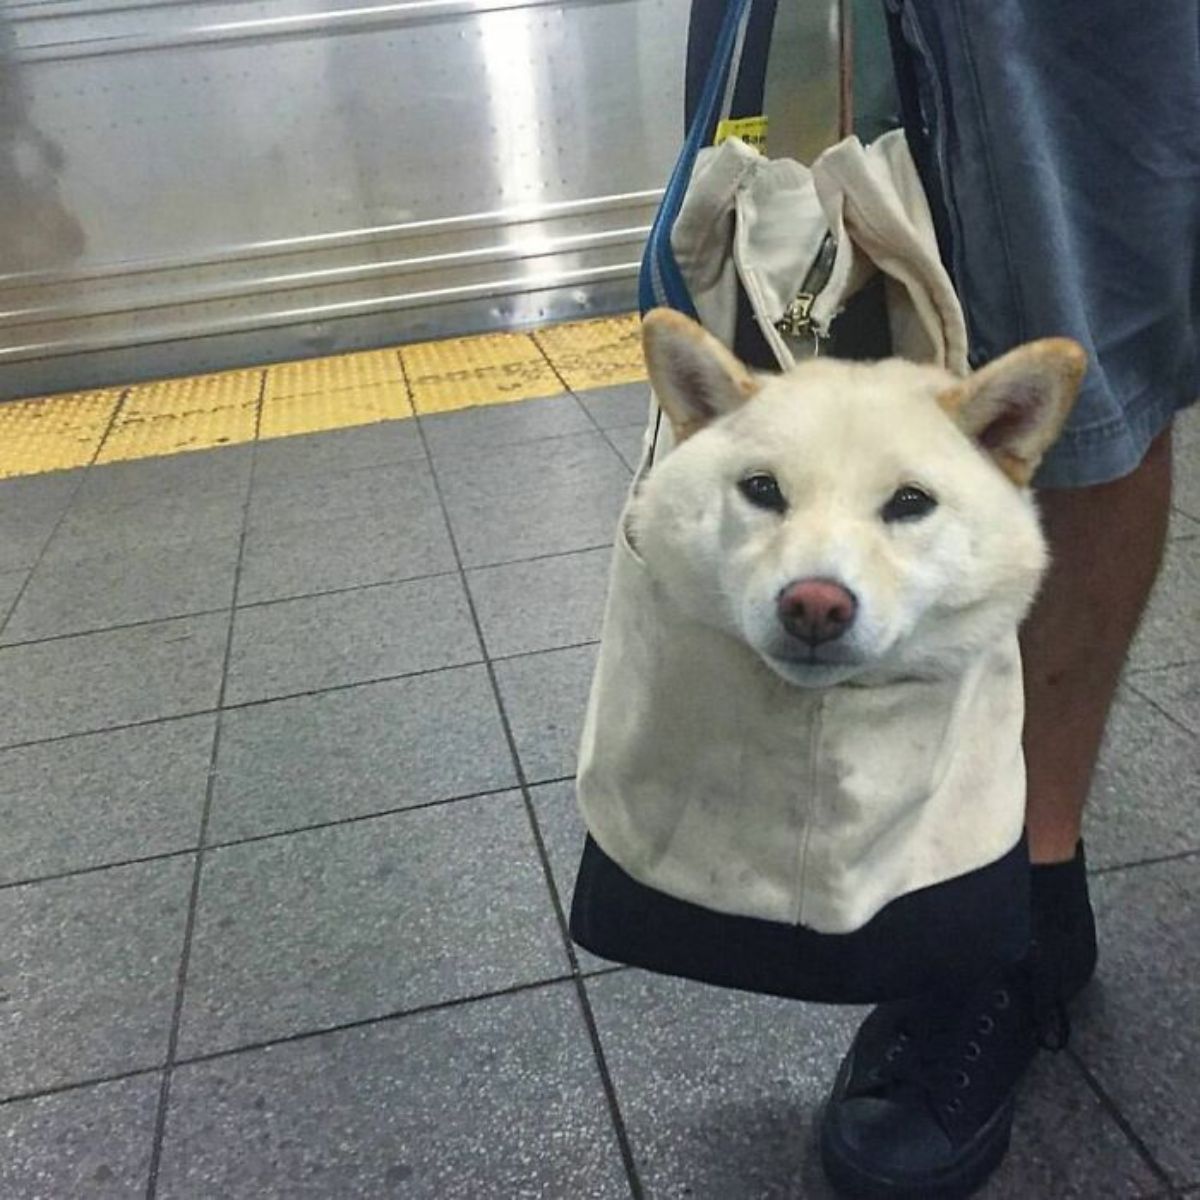 white dog in a black and white cloth bag with its head sticking out with the bag on the floor